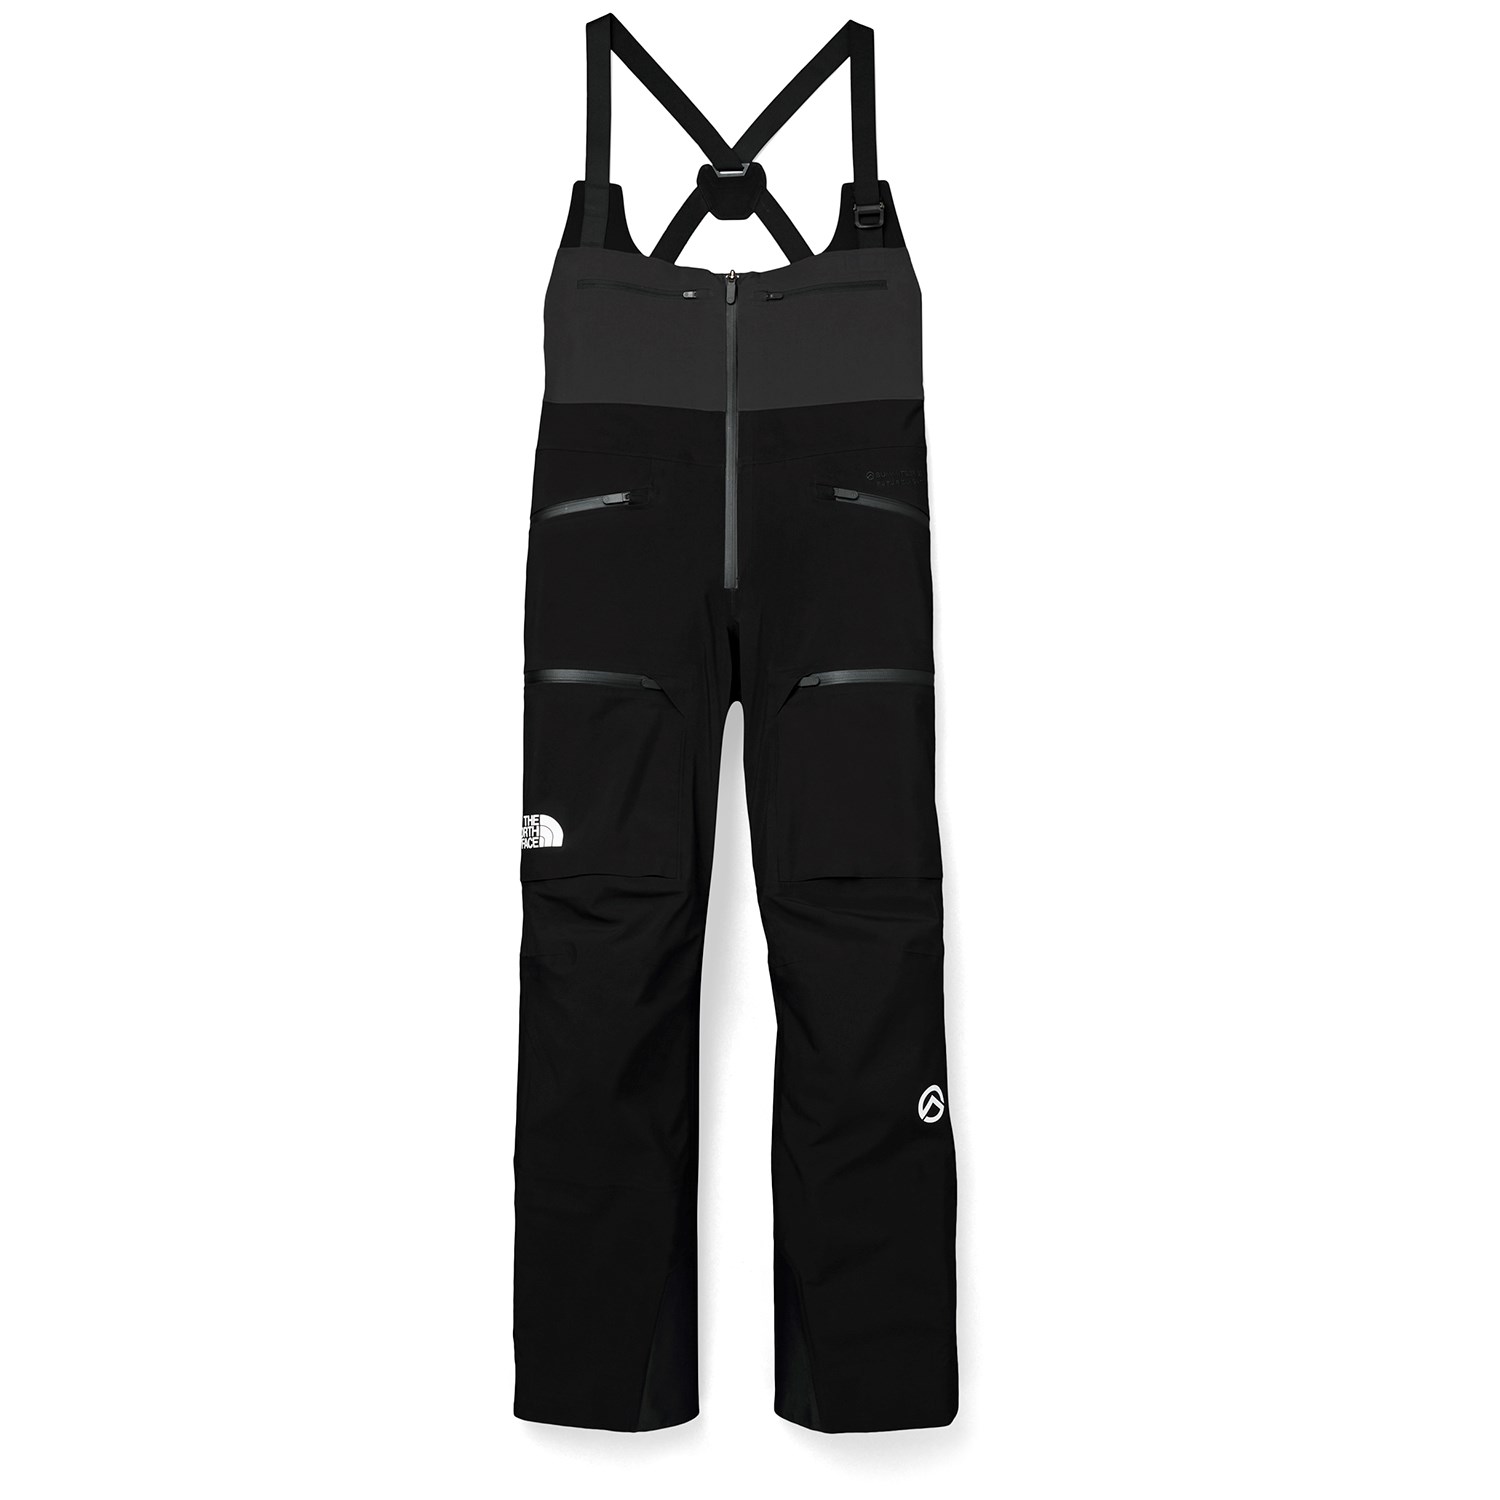  THE NORTH FACE Women's Freedom Stretch Pant (Standard